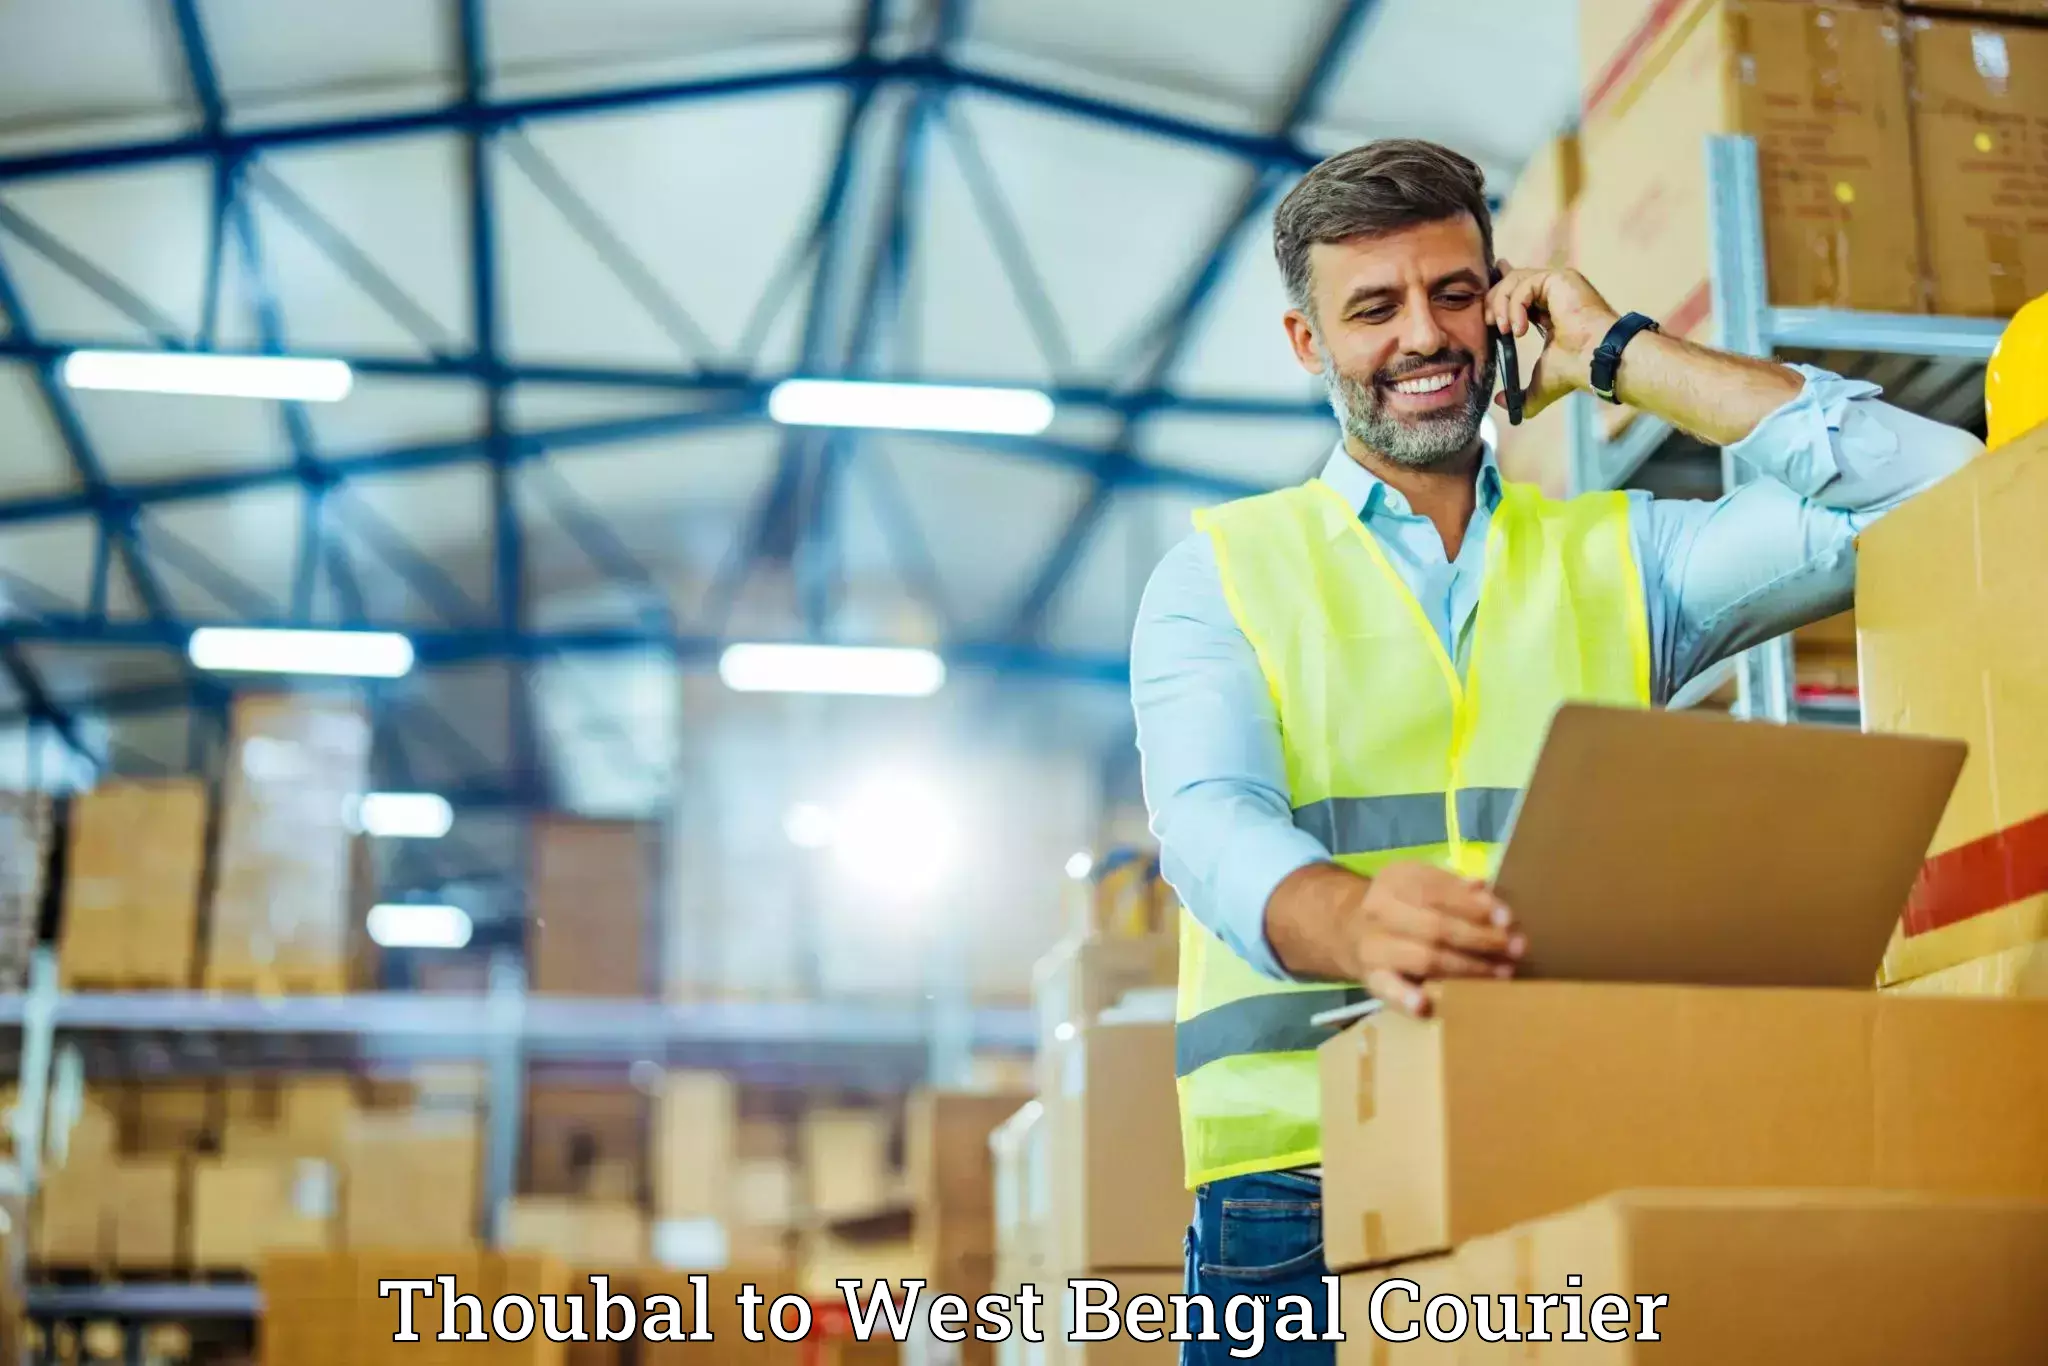 Luggage shipment specialists Thoubal to West Bengal